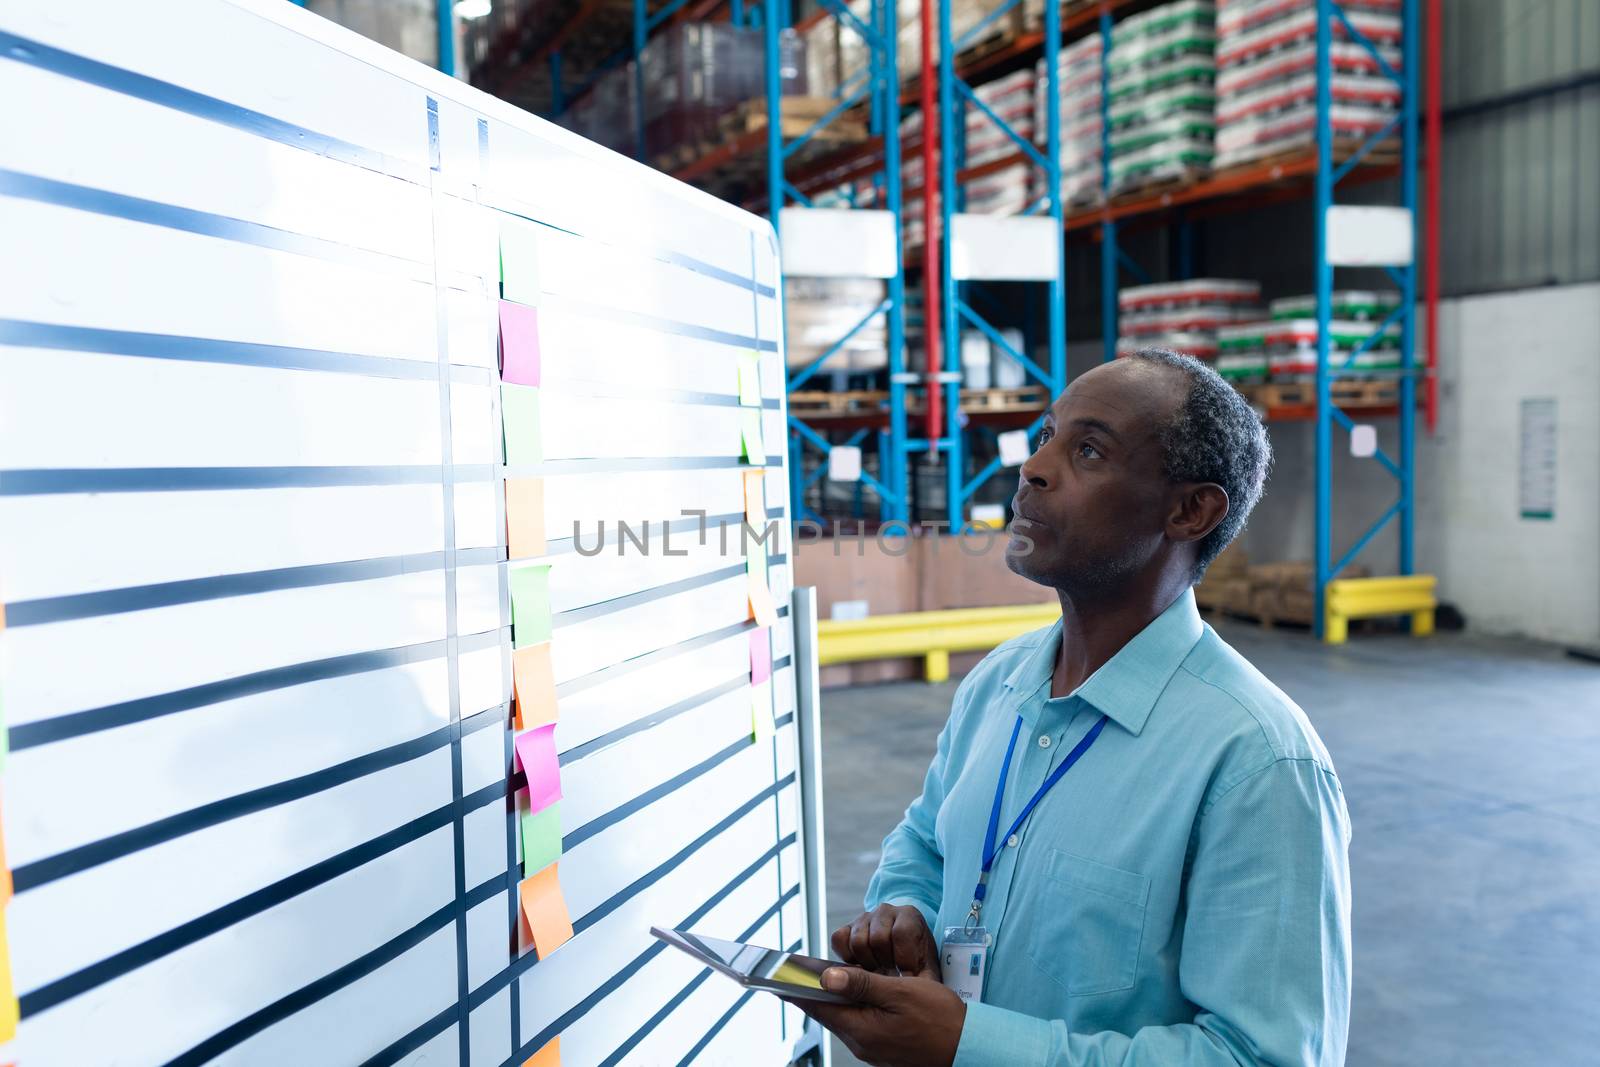 Side view of handsome mature African American male supervisor looking at whiteboard in warehouse. This is a freight transportation and distribution warehouse. Industrial and industrial workers concept